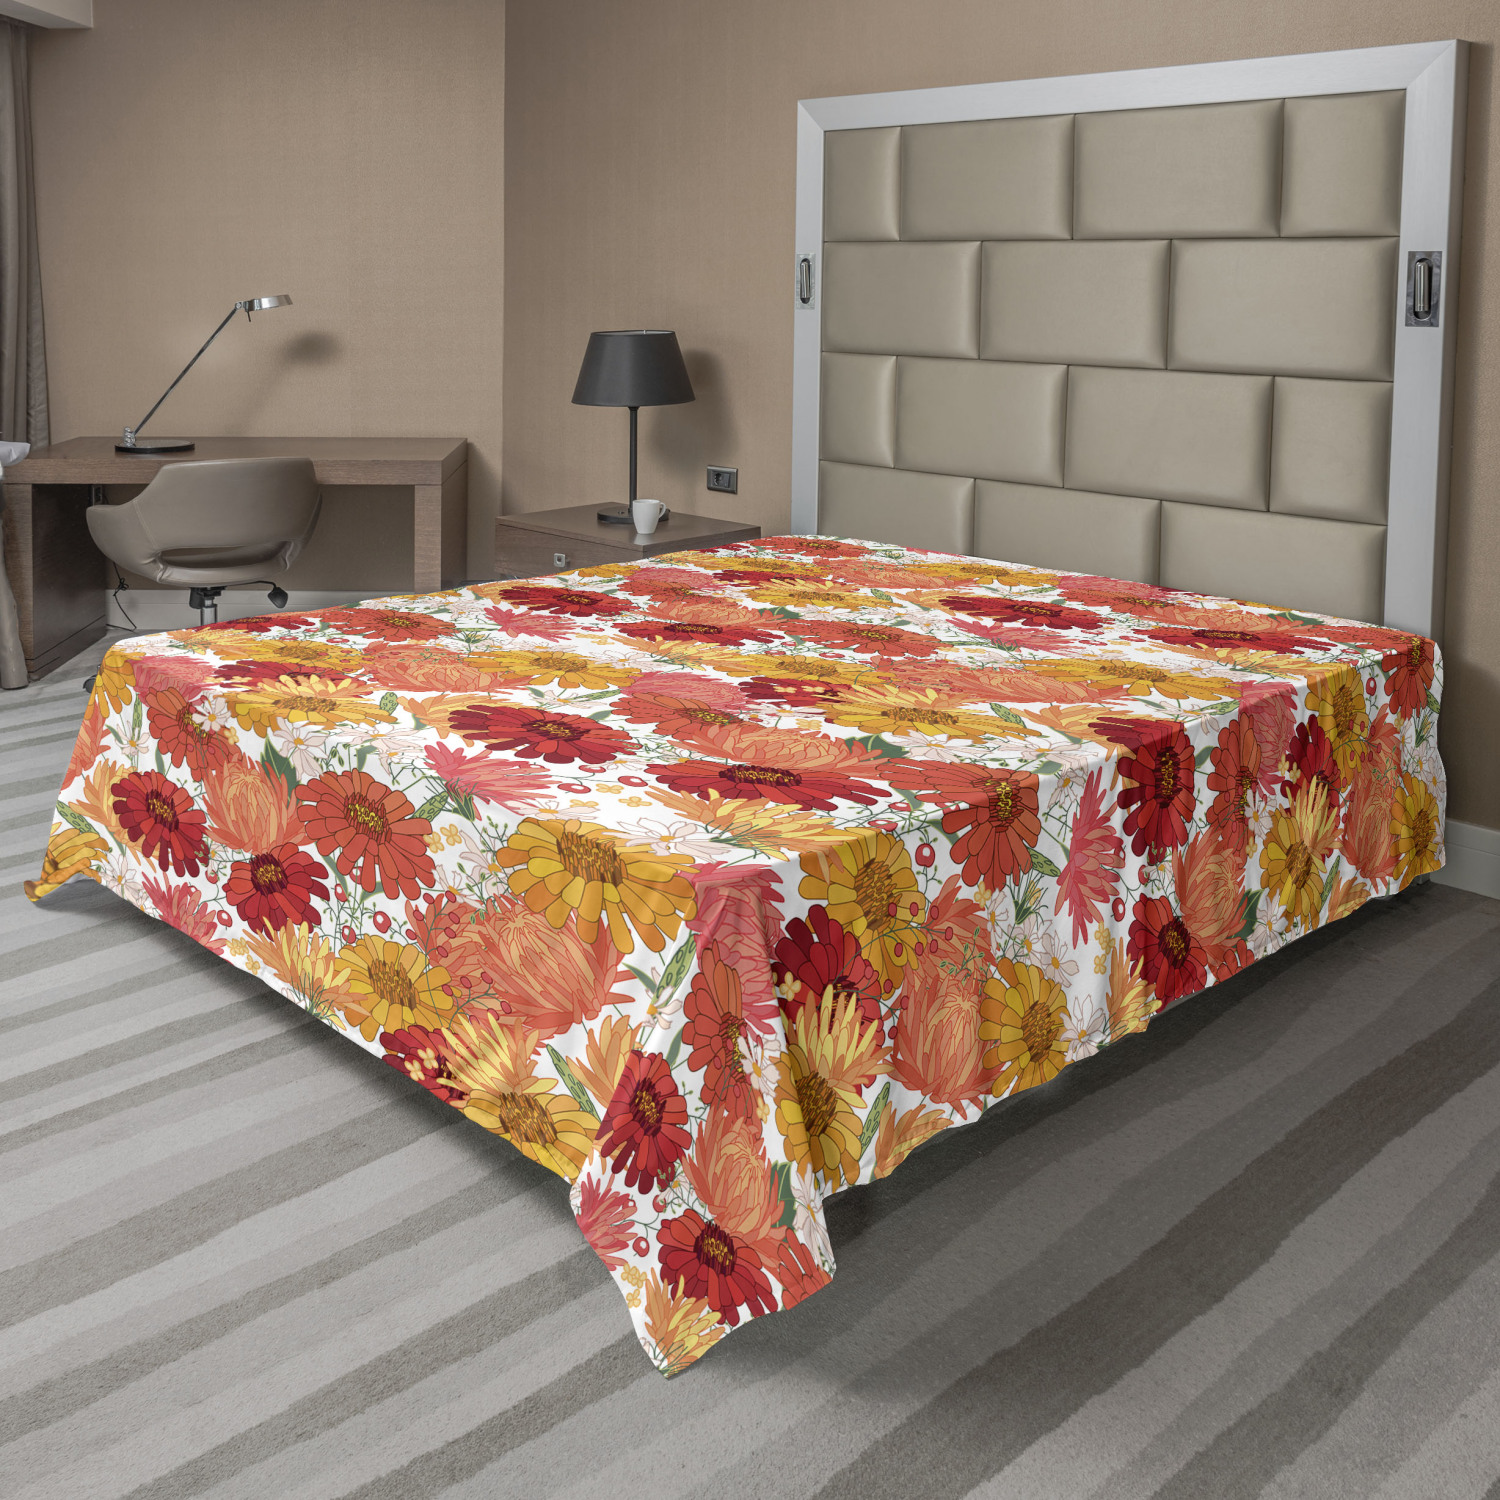 Details about   Ambesonne Aster Flat Sheet Top Sheet Decorative Bedding 6 Sizes 